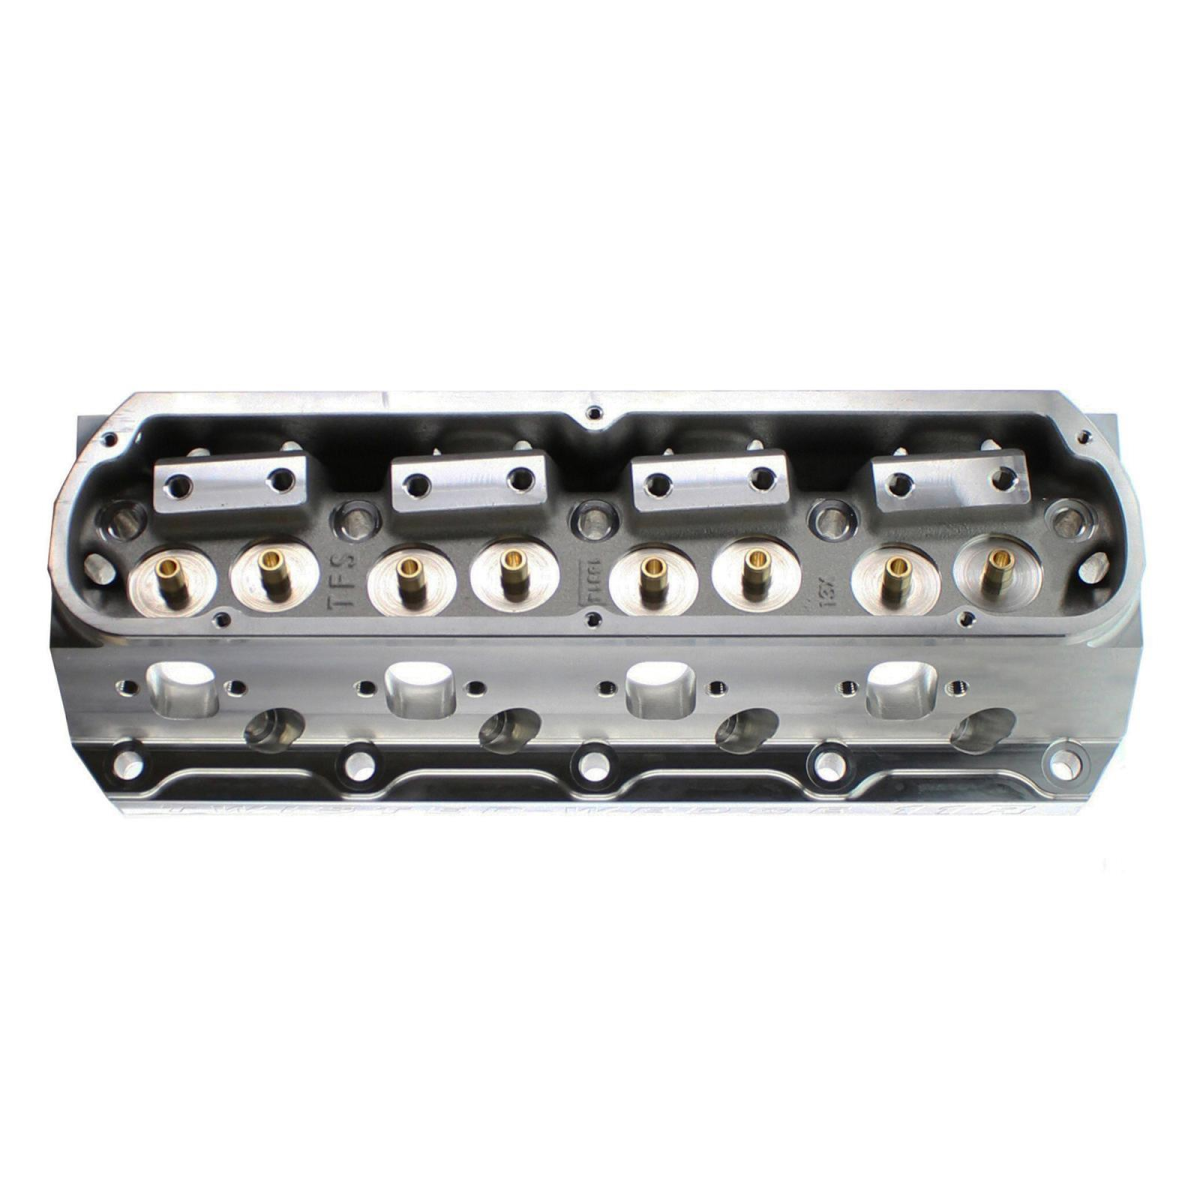 Trickflow - Trick Flow Twisted Wedge 11R Street 170cc Bare Cylinder Head Casting, SBF, 53cc Chambers - Image 1